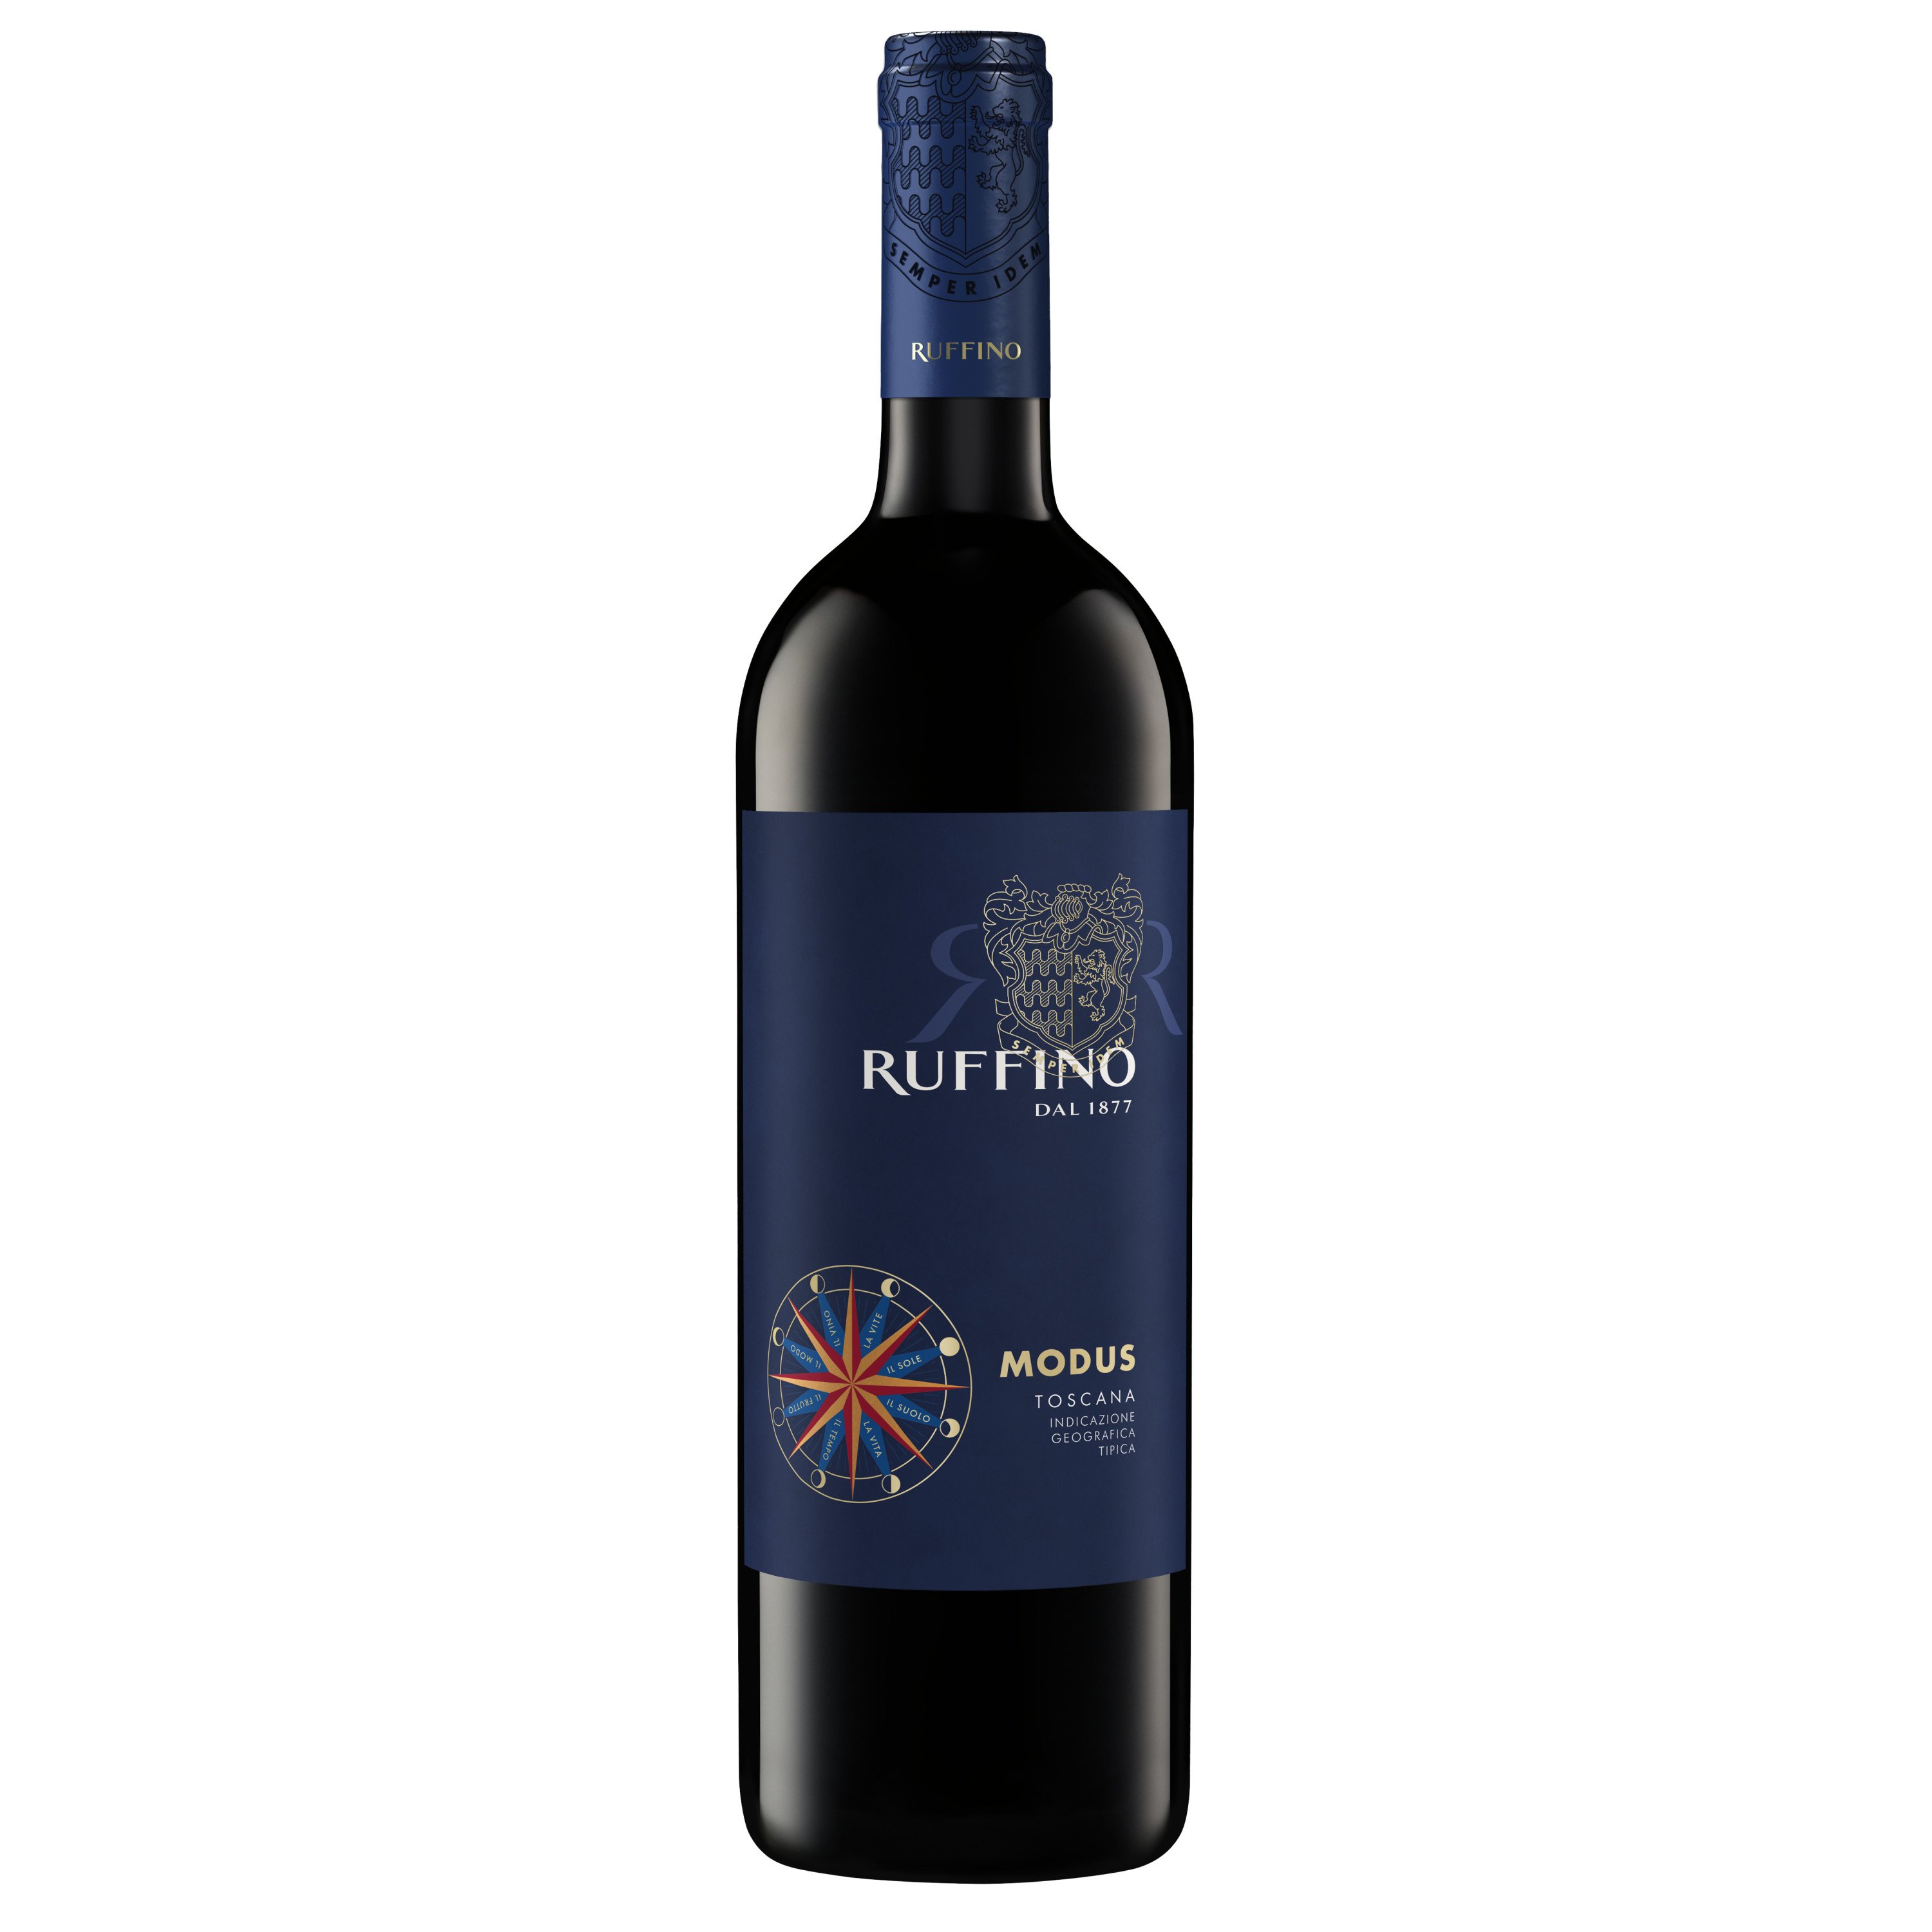 Ruffino Modus Toscana Igt Red Blend Italian Red Wine 750 Ml Bottle Shop Wine At H E B